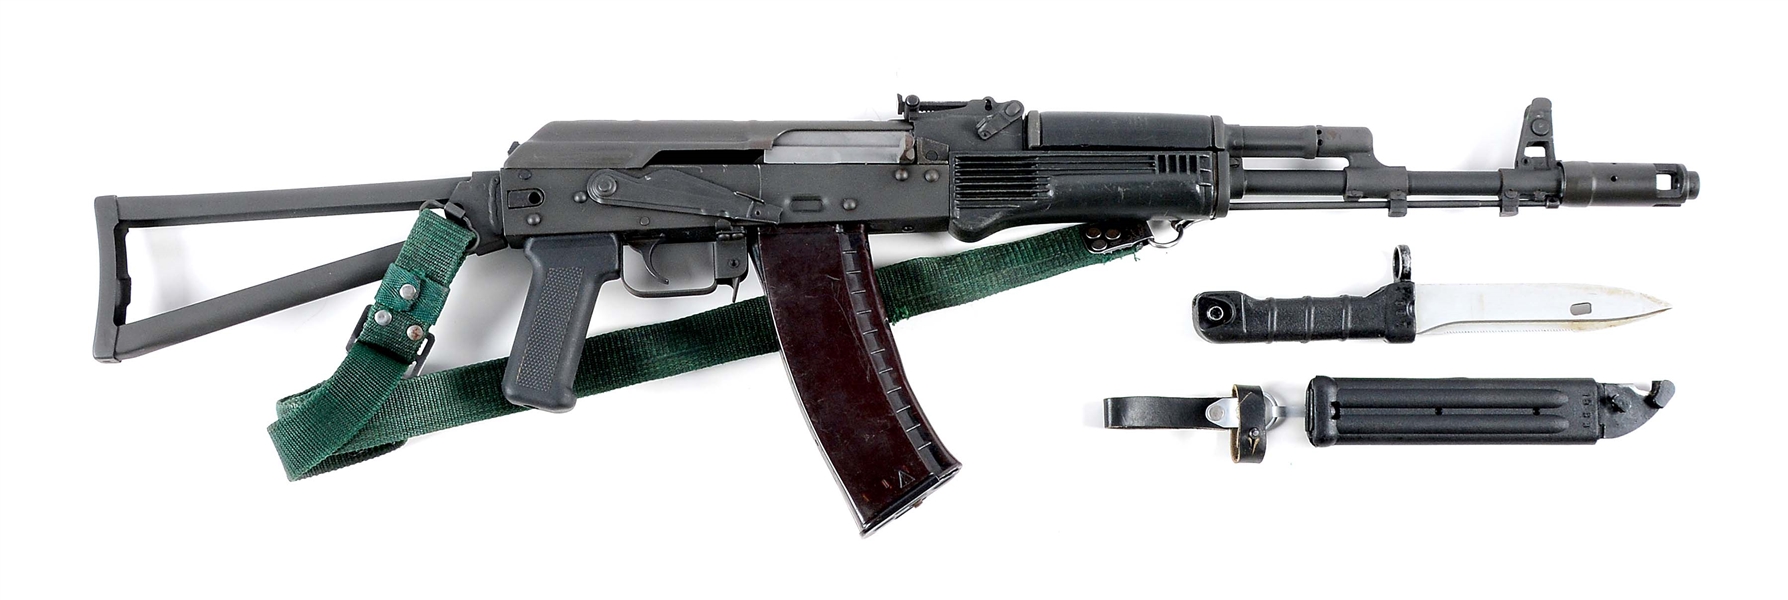 (M) BULGARIAN NODAK SPUD NDS-2SF AK74S SEMI AUTOMATIC RIFLE WITH 2800 ROUNDS OF AMMUNITION AND ACCESSORIES.